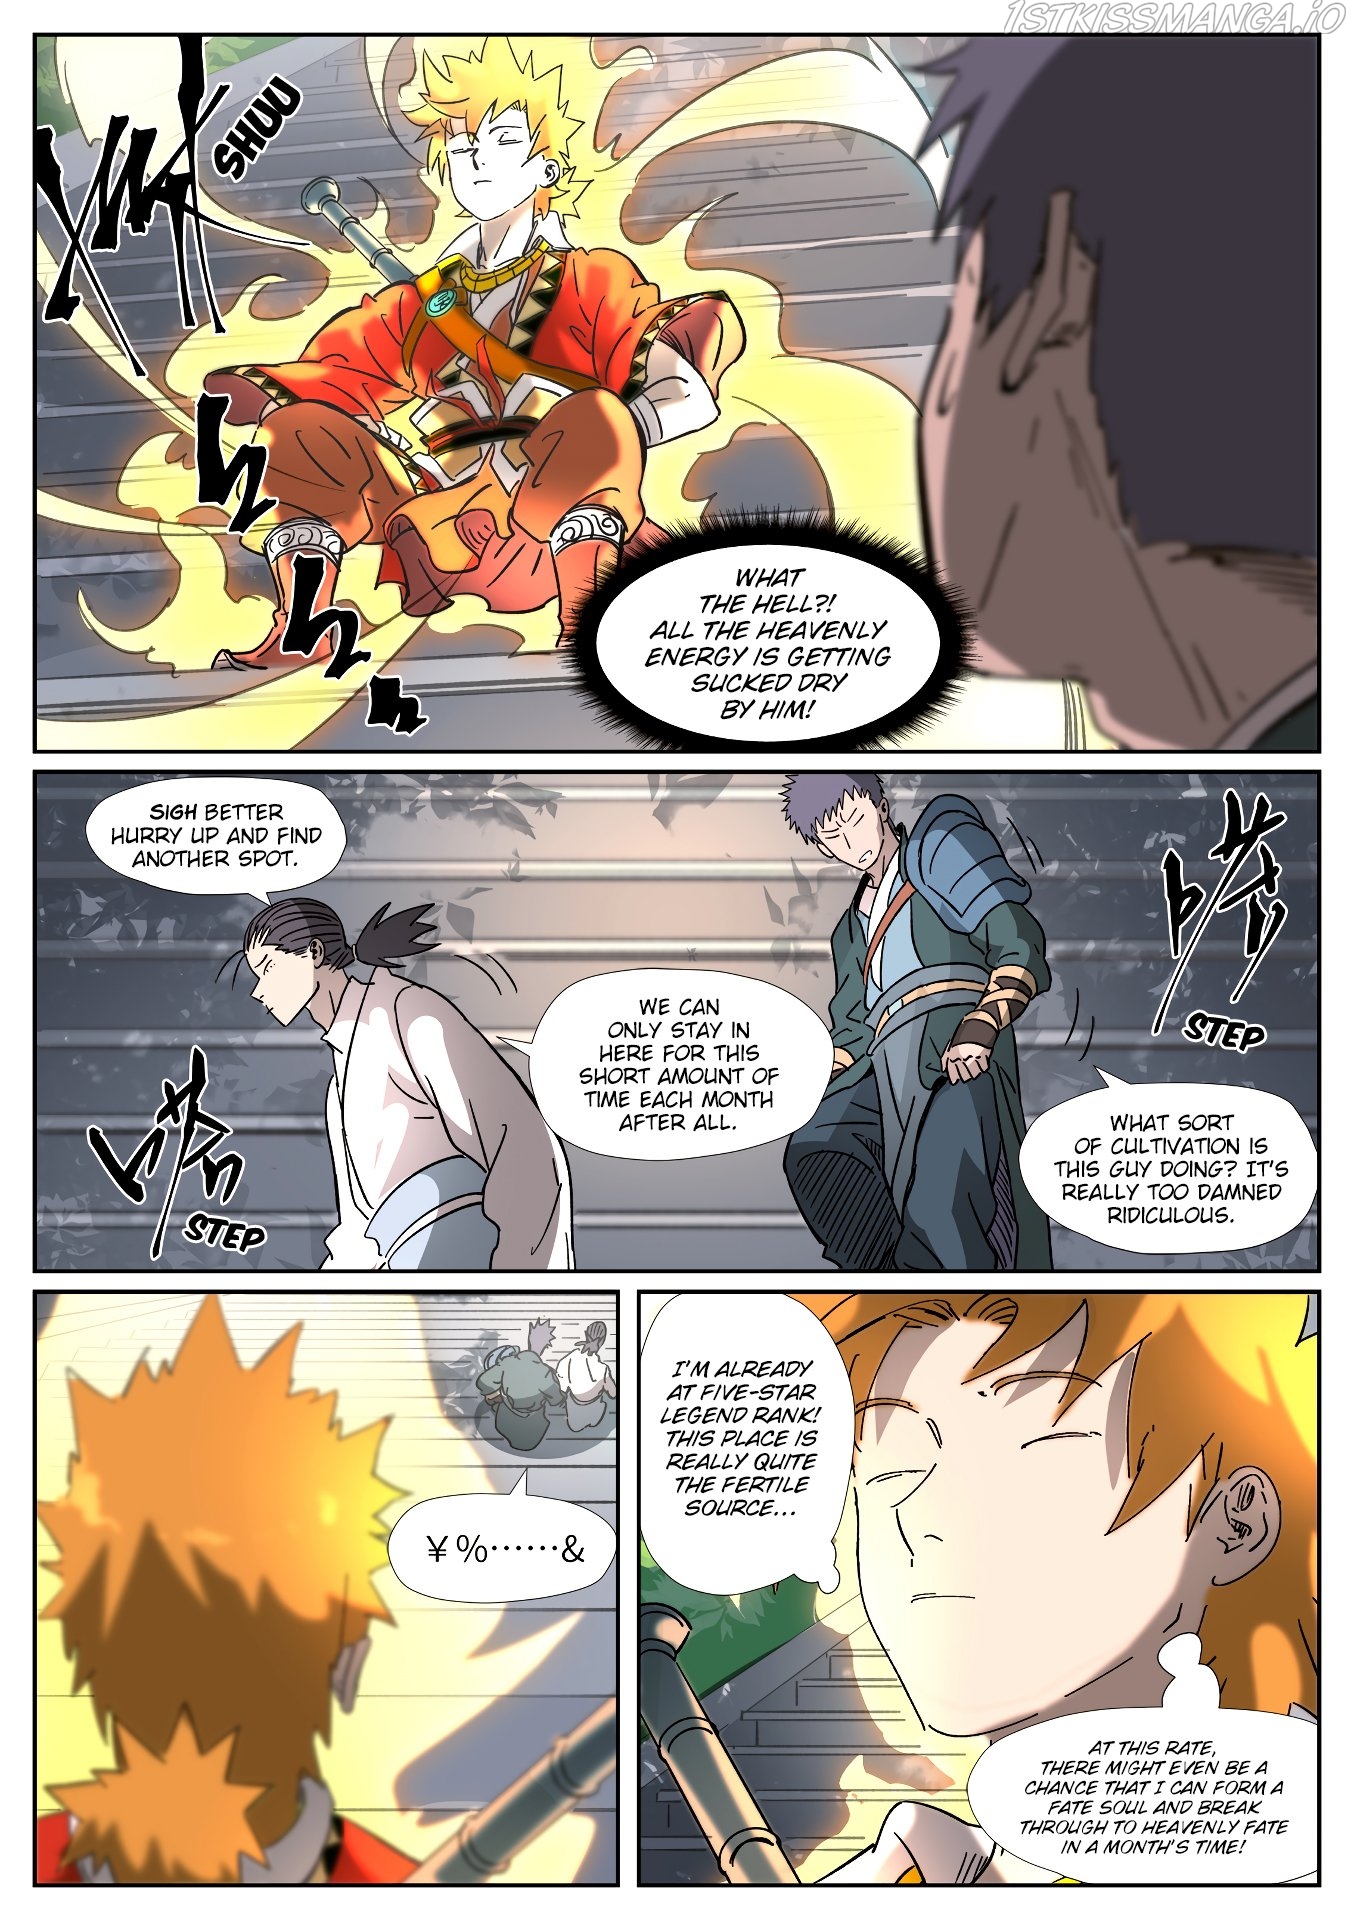 Tales of Demons and Gods Manhua Chapter 313.5 - Page 2